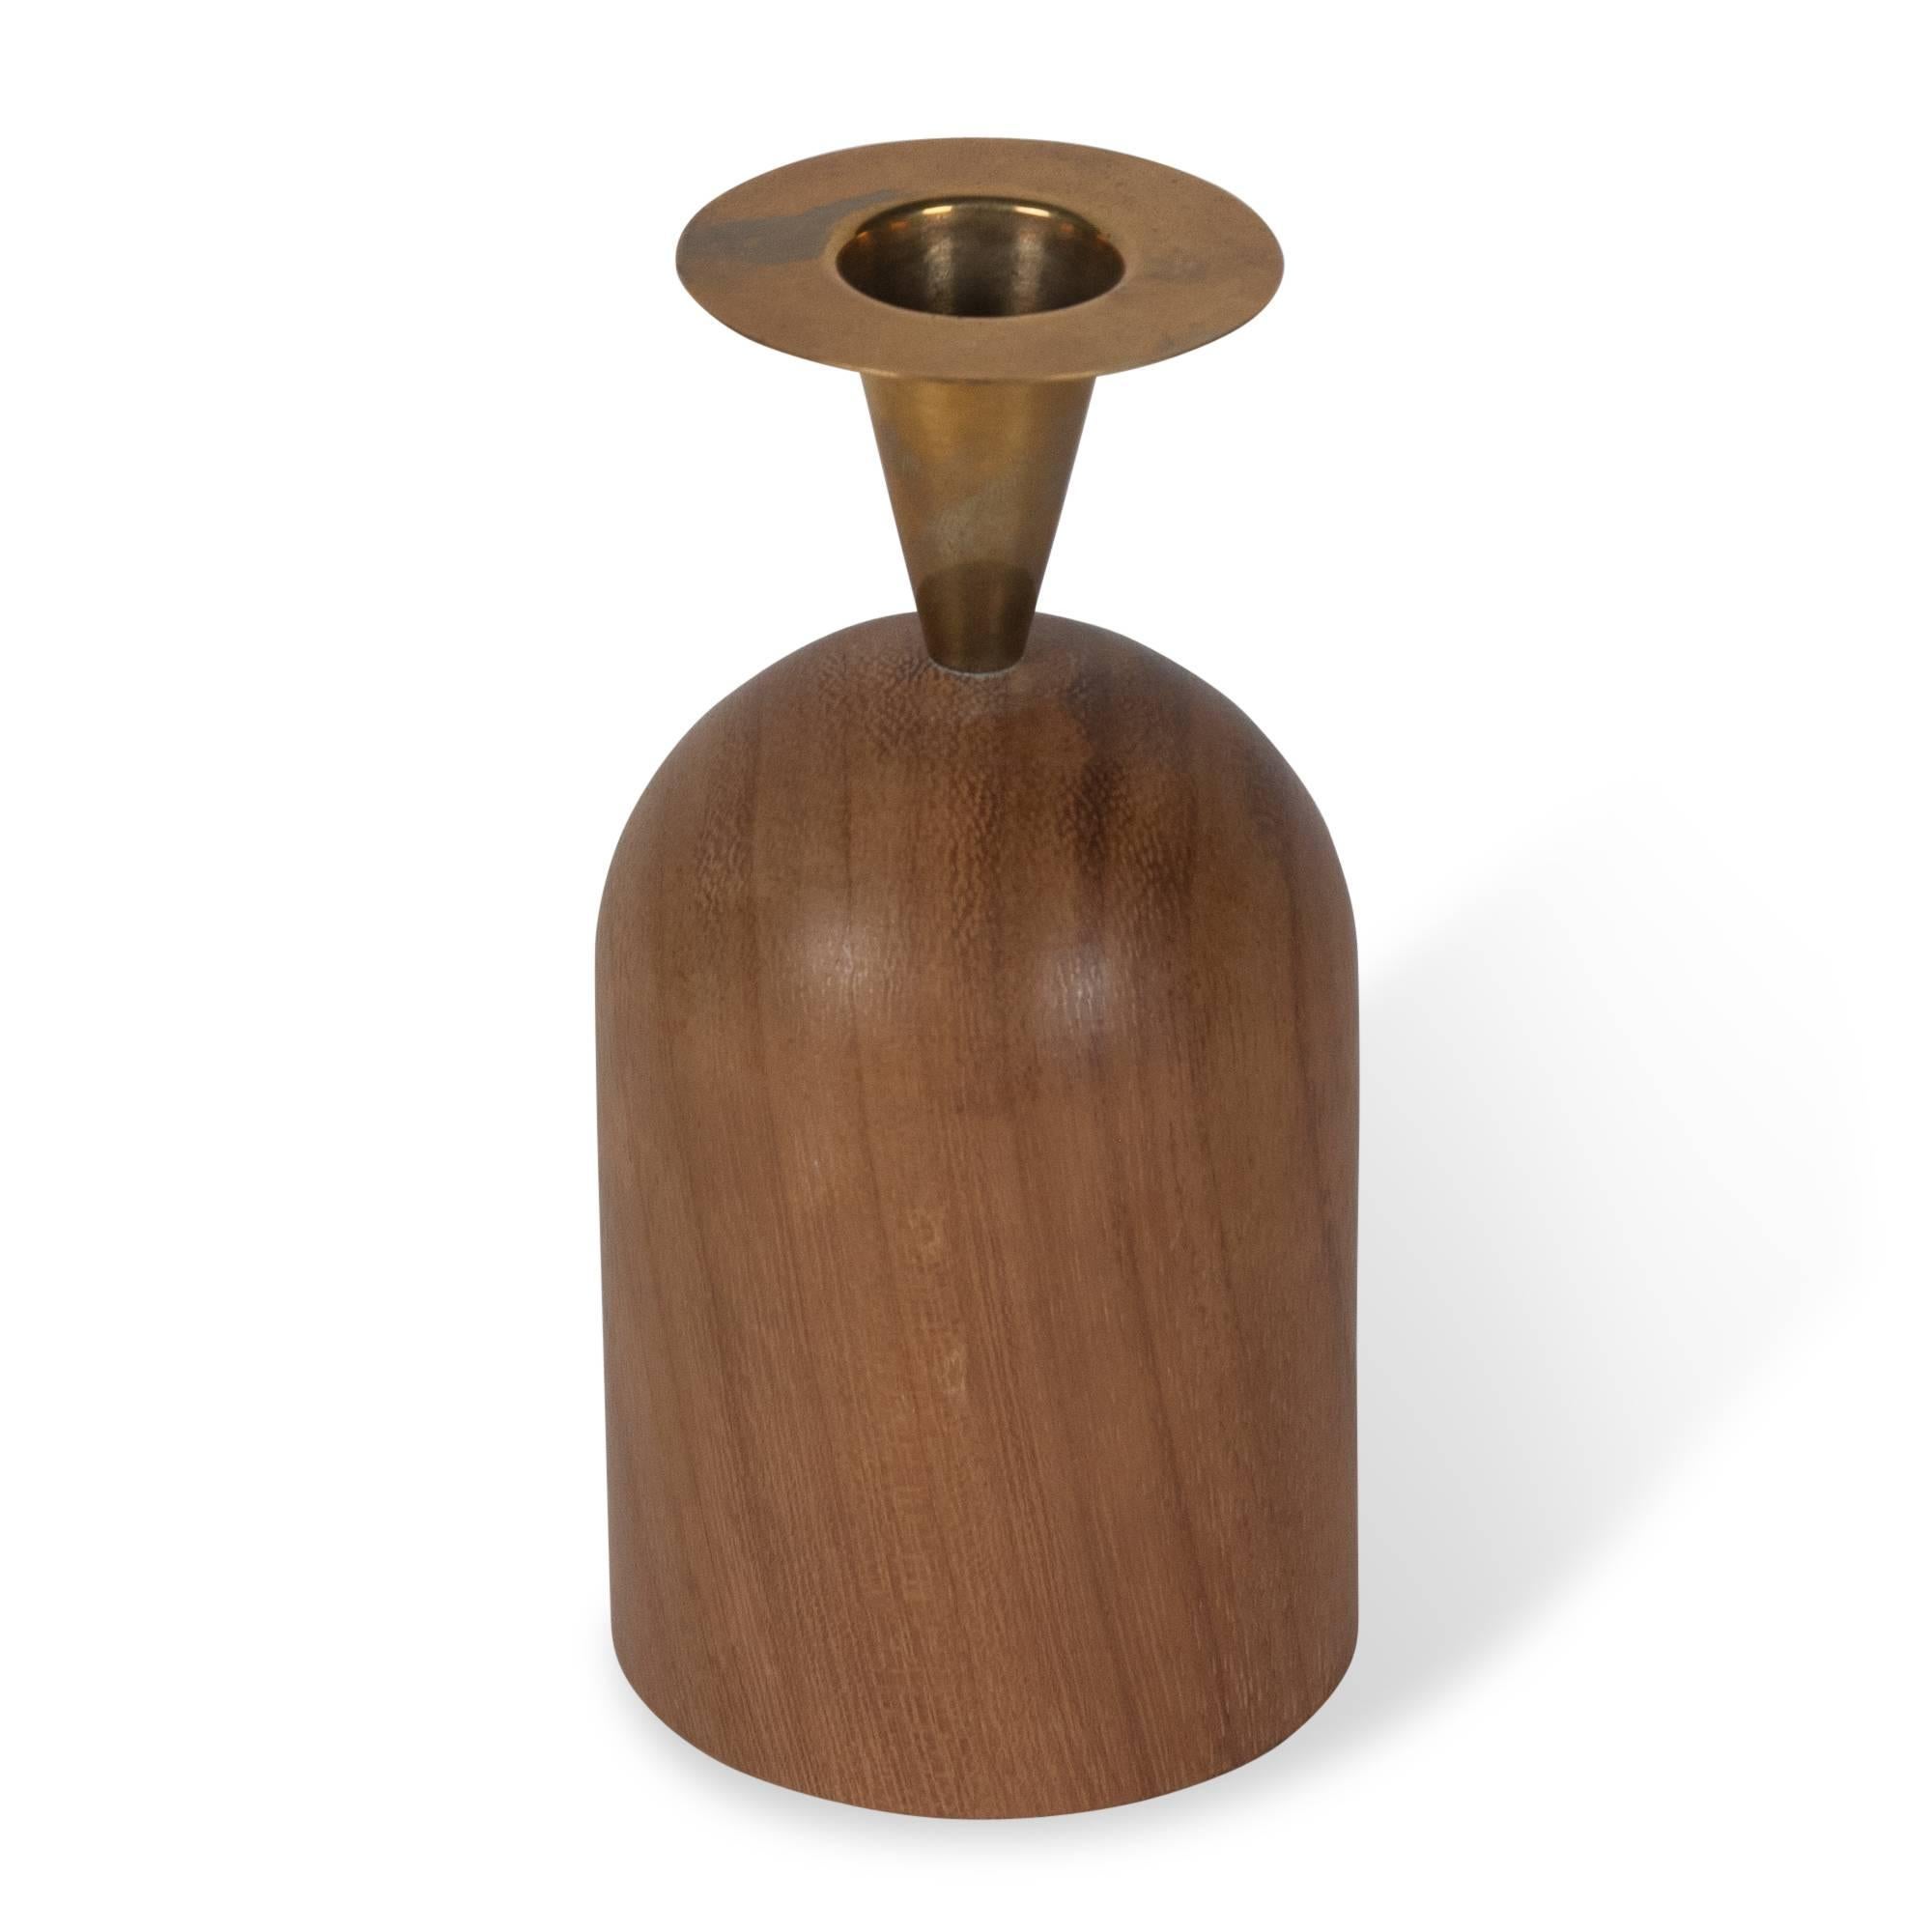 Turned walnut and bronze candleholder, by Carl Auböck, Austria, 1950s. Measures: Height 5 1/2 in, diameter 3 in.